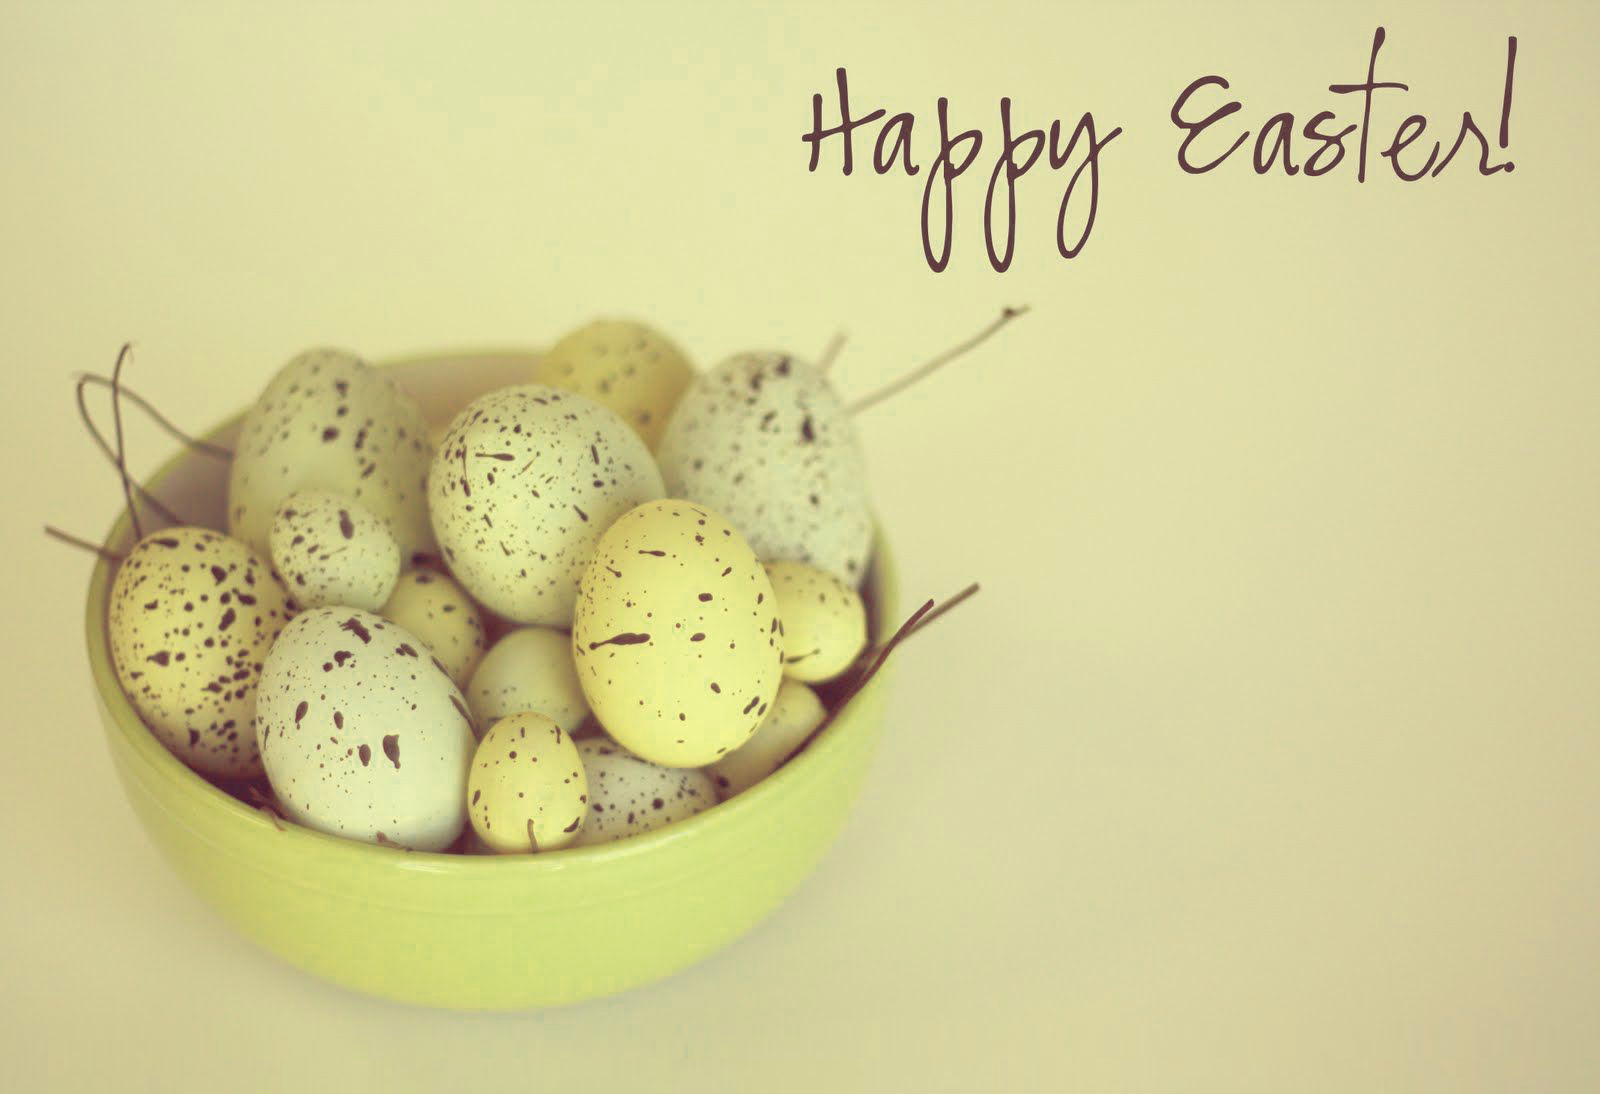 happy easter new free awesome image for mobile